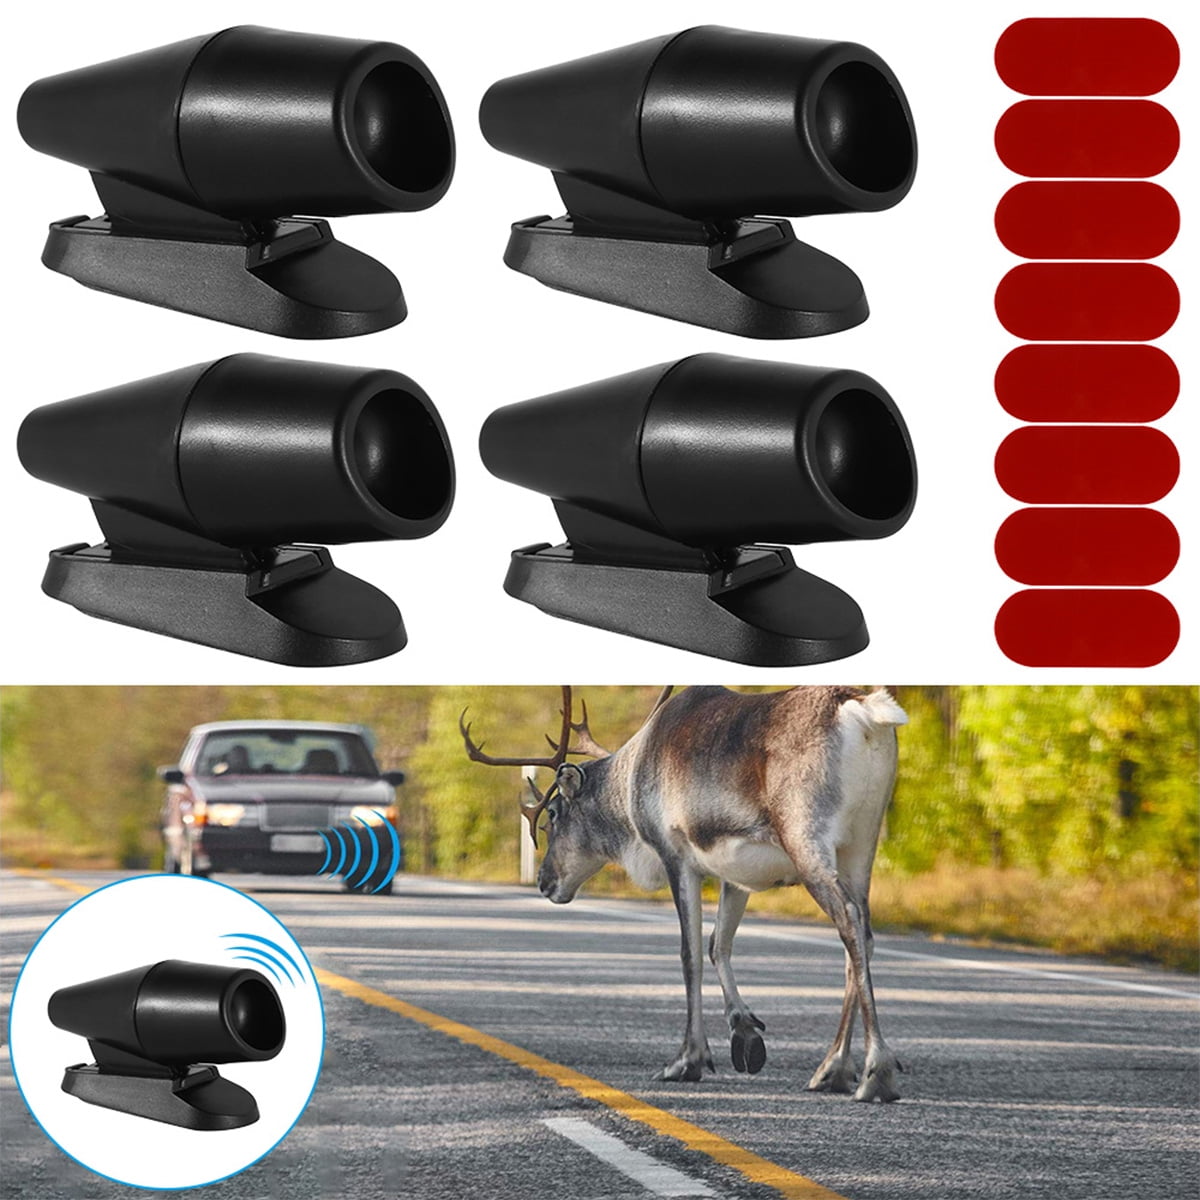 8 Deer Whistles Sonic Wildlife Warning Device Animal Alert Car Safety  Accessory